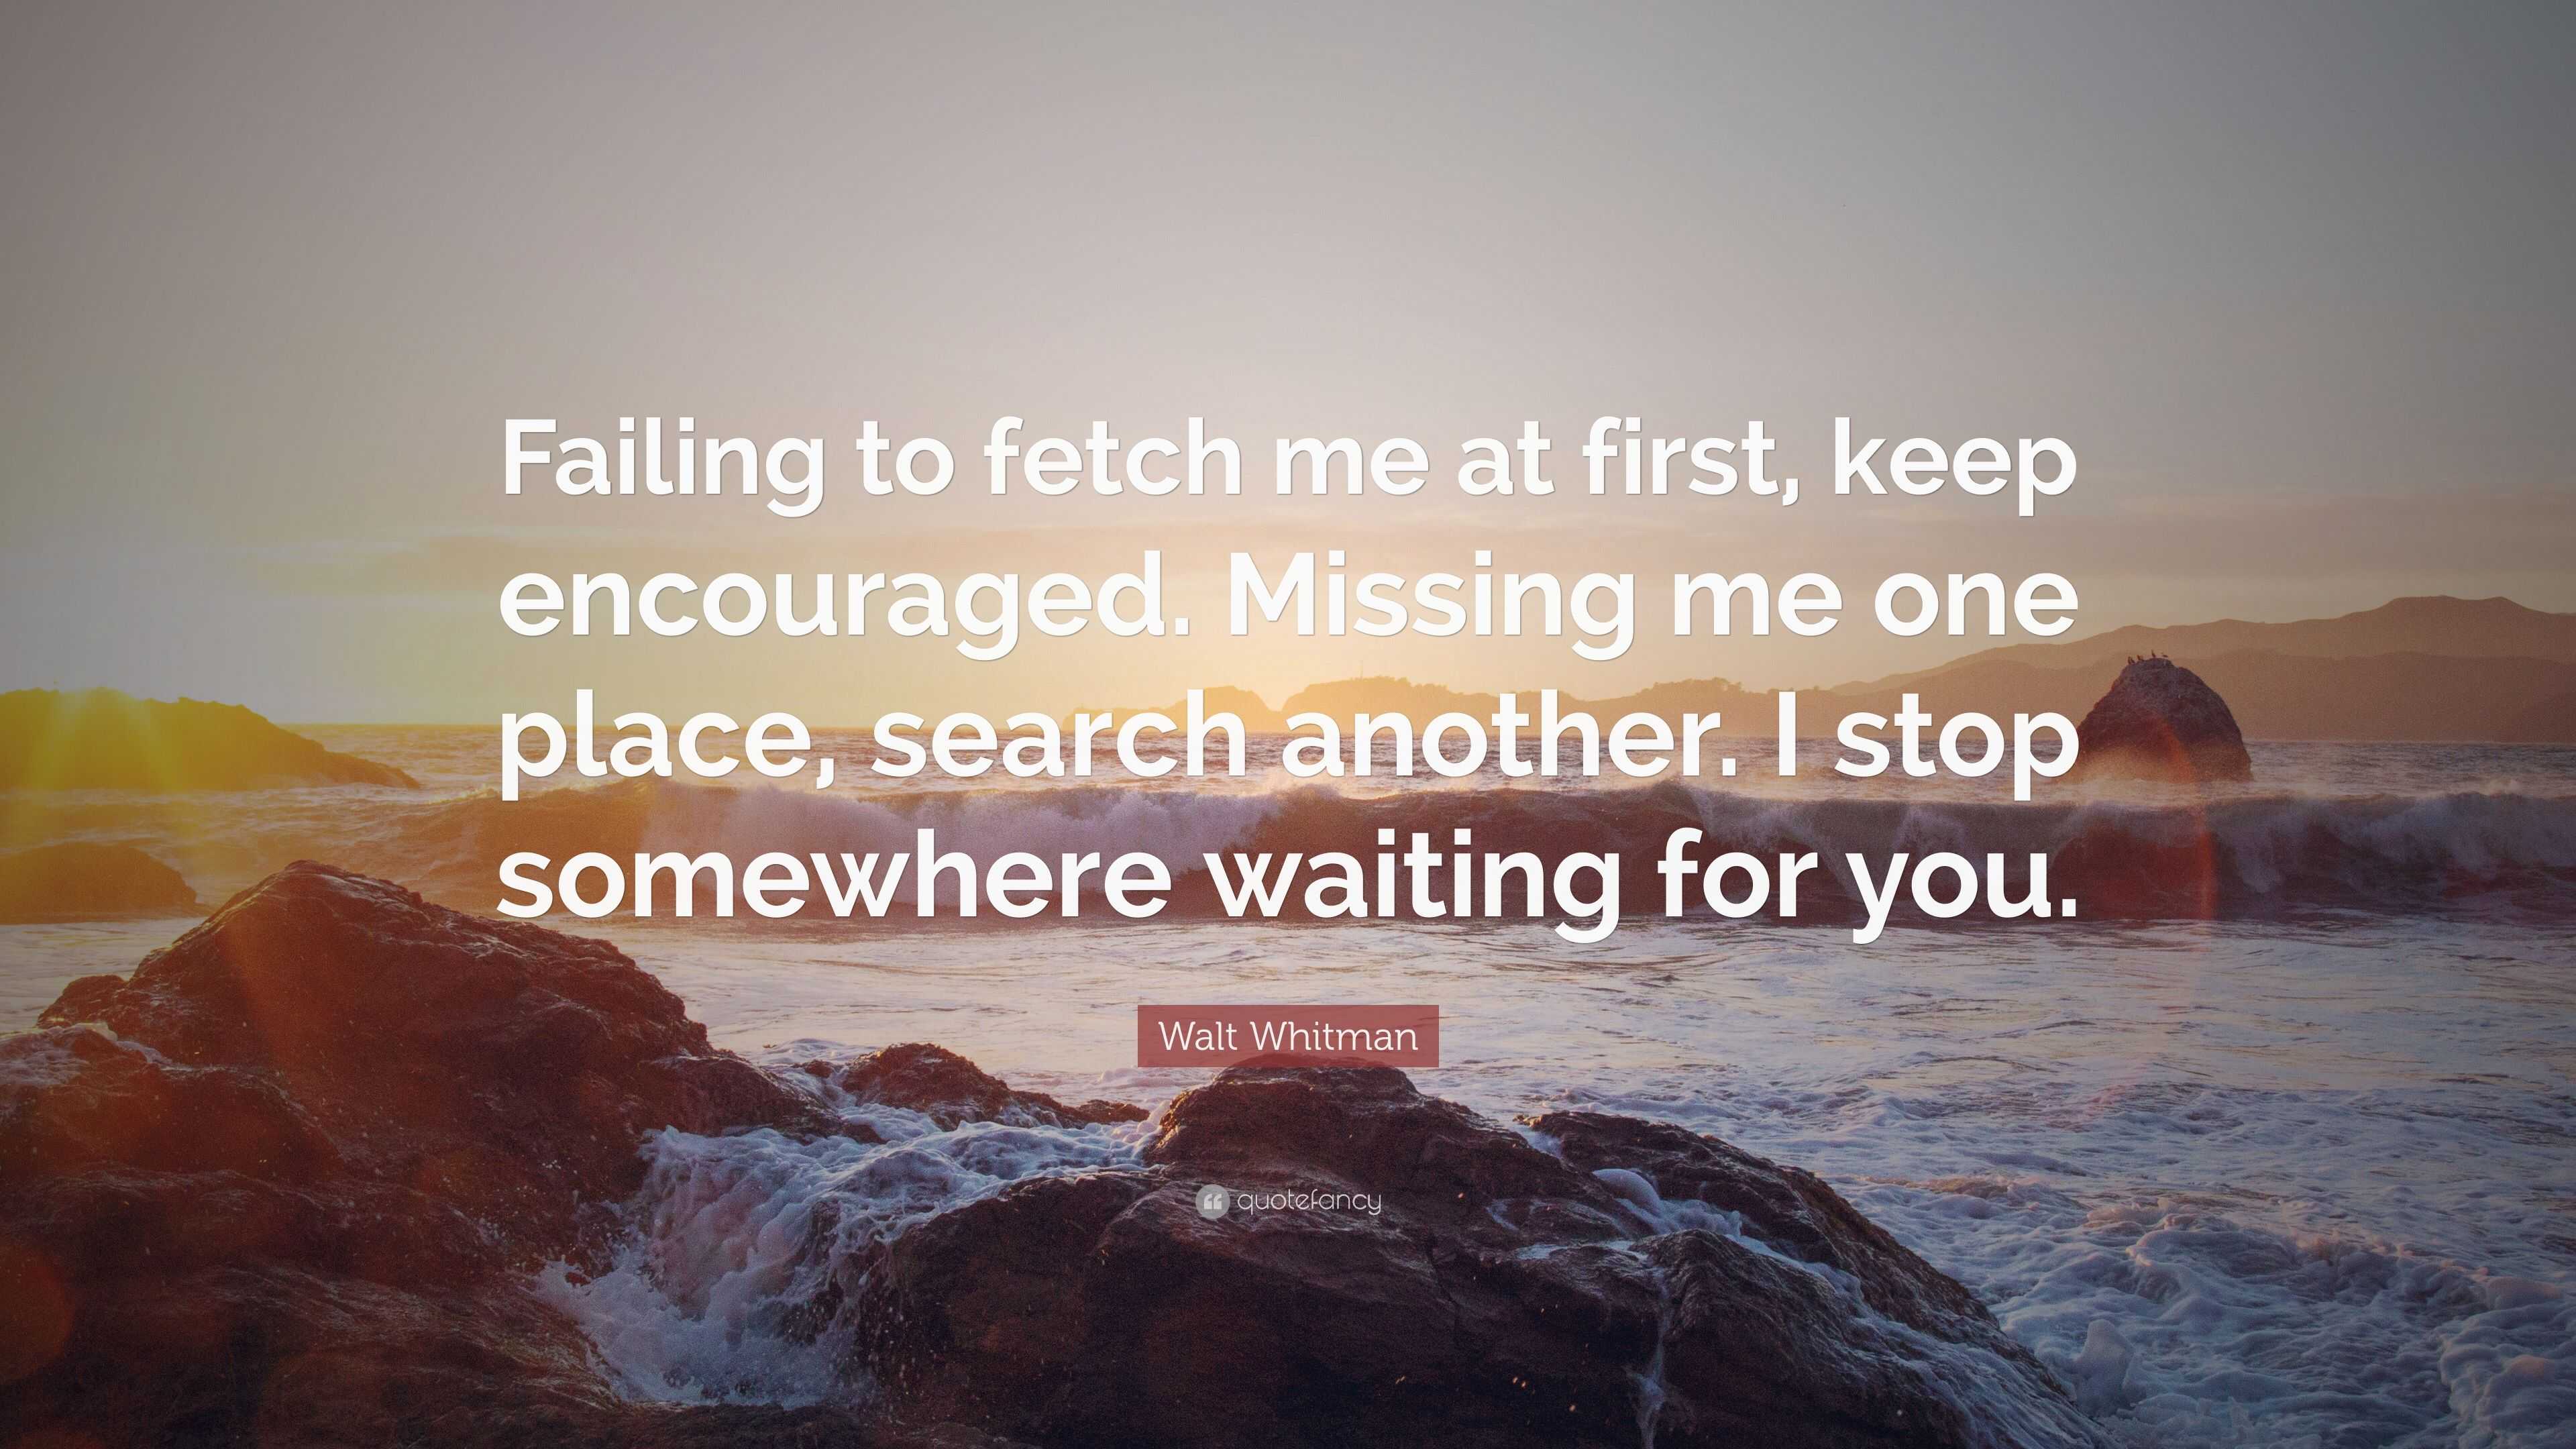 Walt Whitman Quote: “Failing to fetch me at first, keep encouraged. Missing  me one place, search